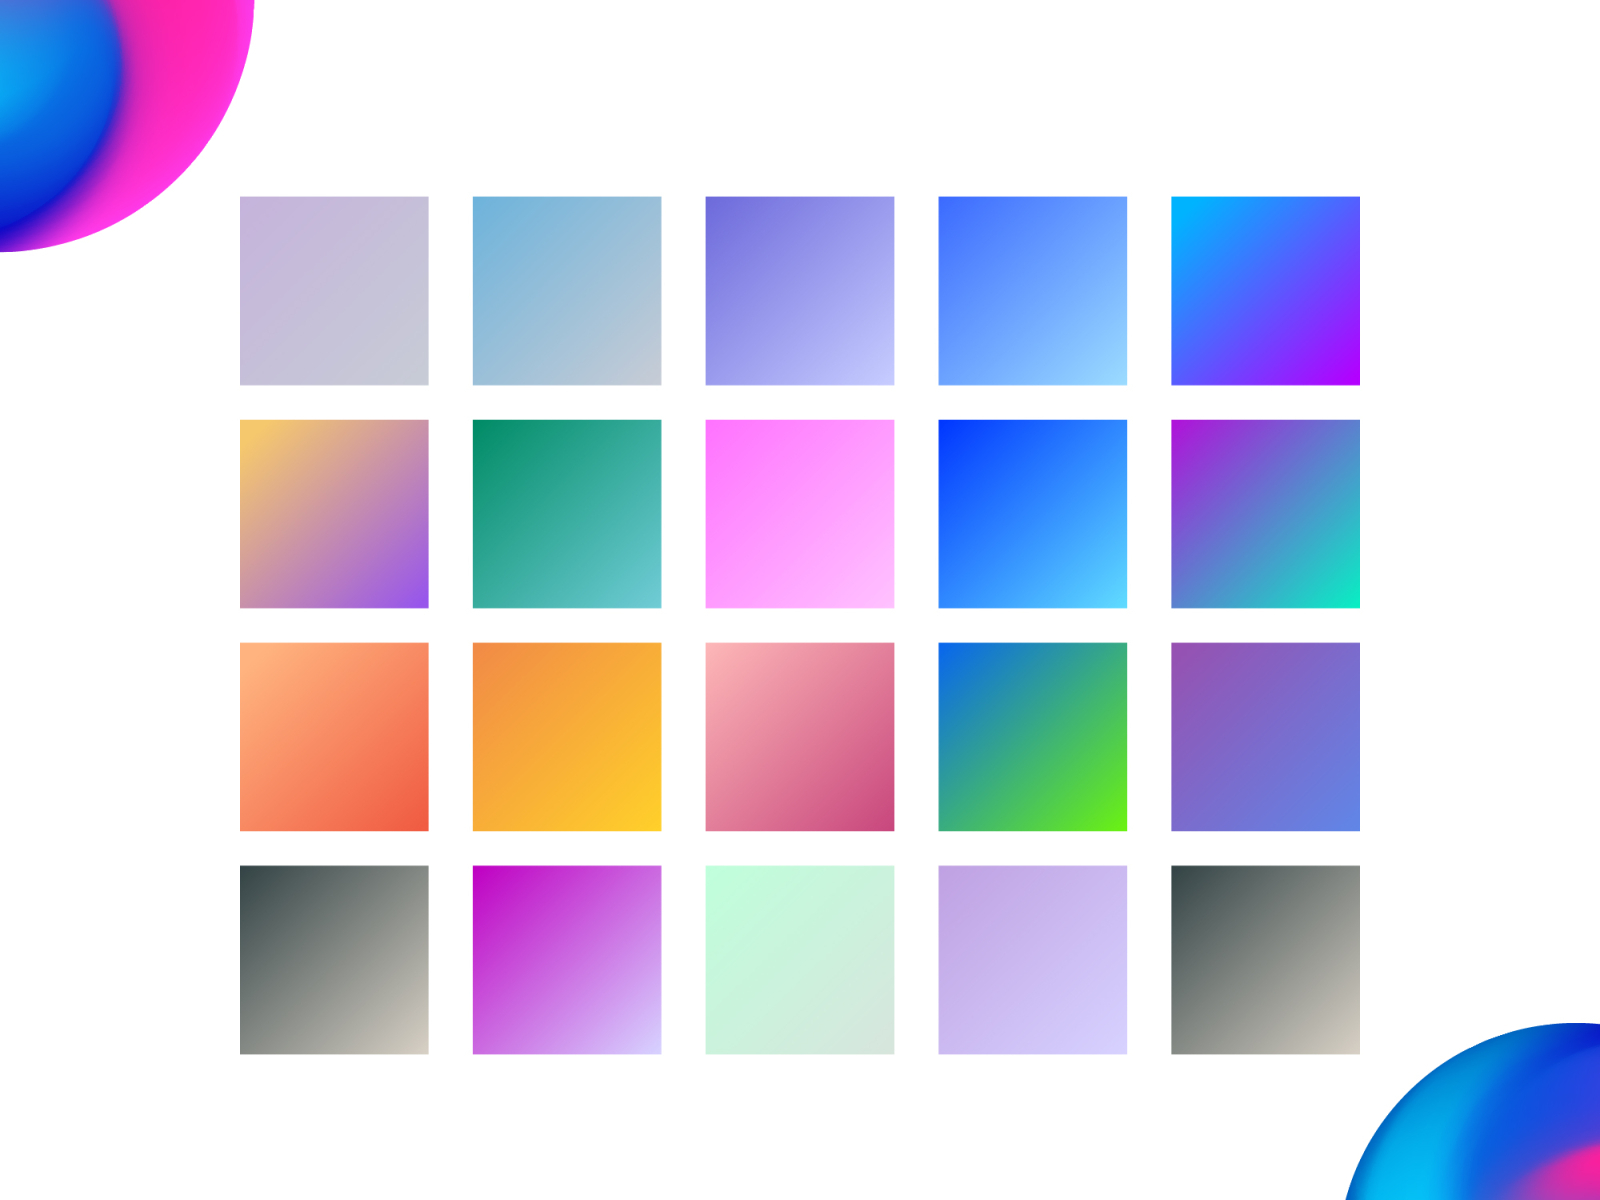 49+ Color Gradients by Md Aminul Islam on Dribbble